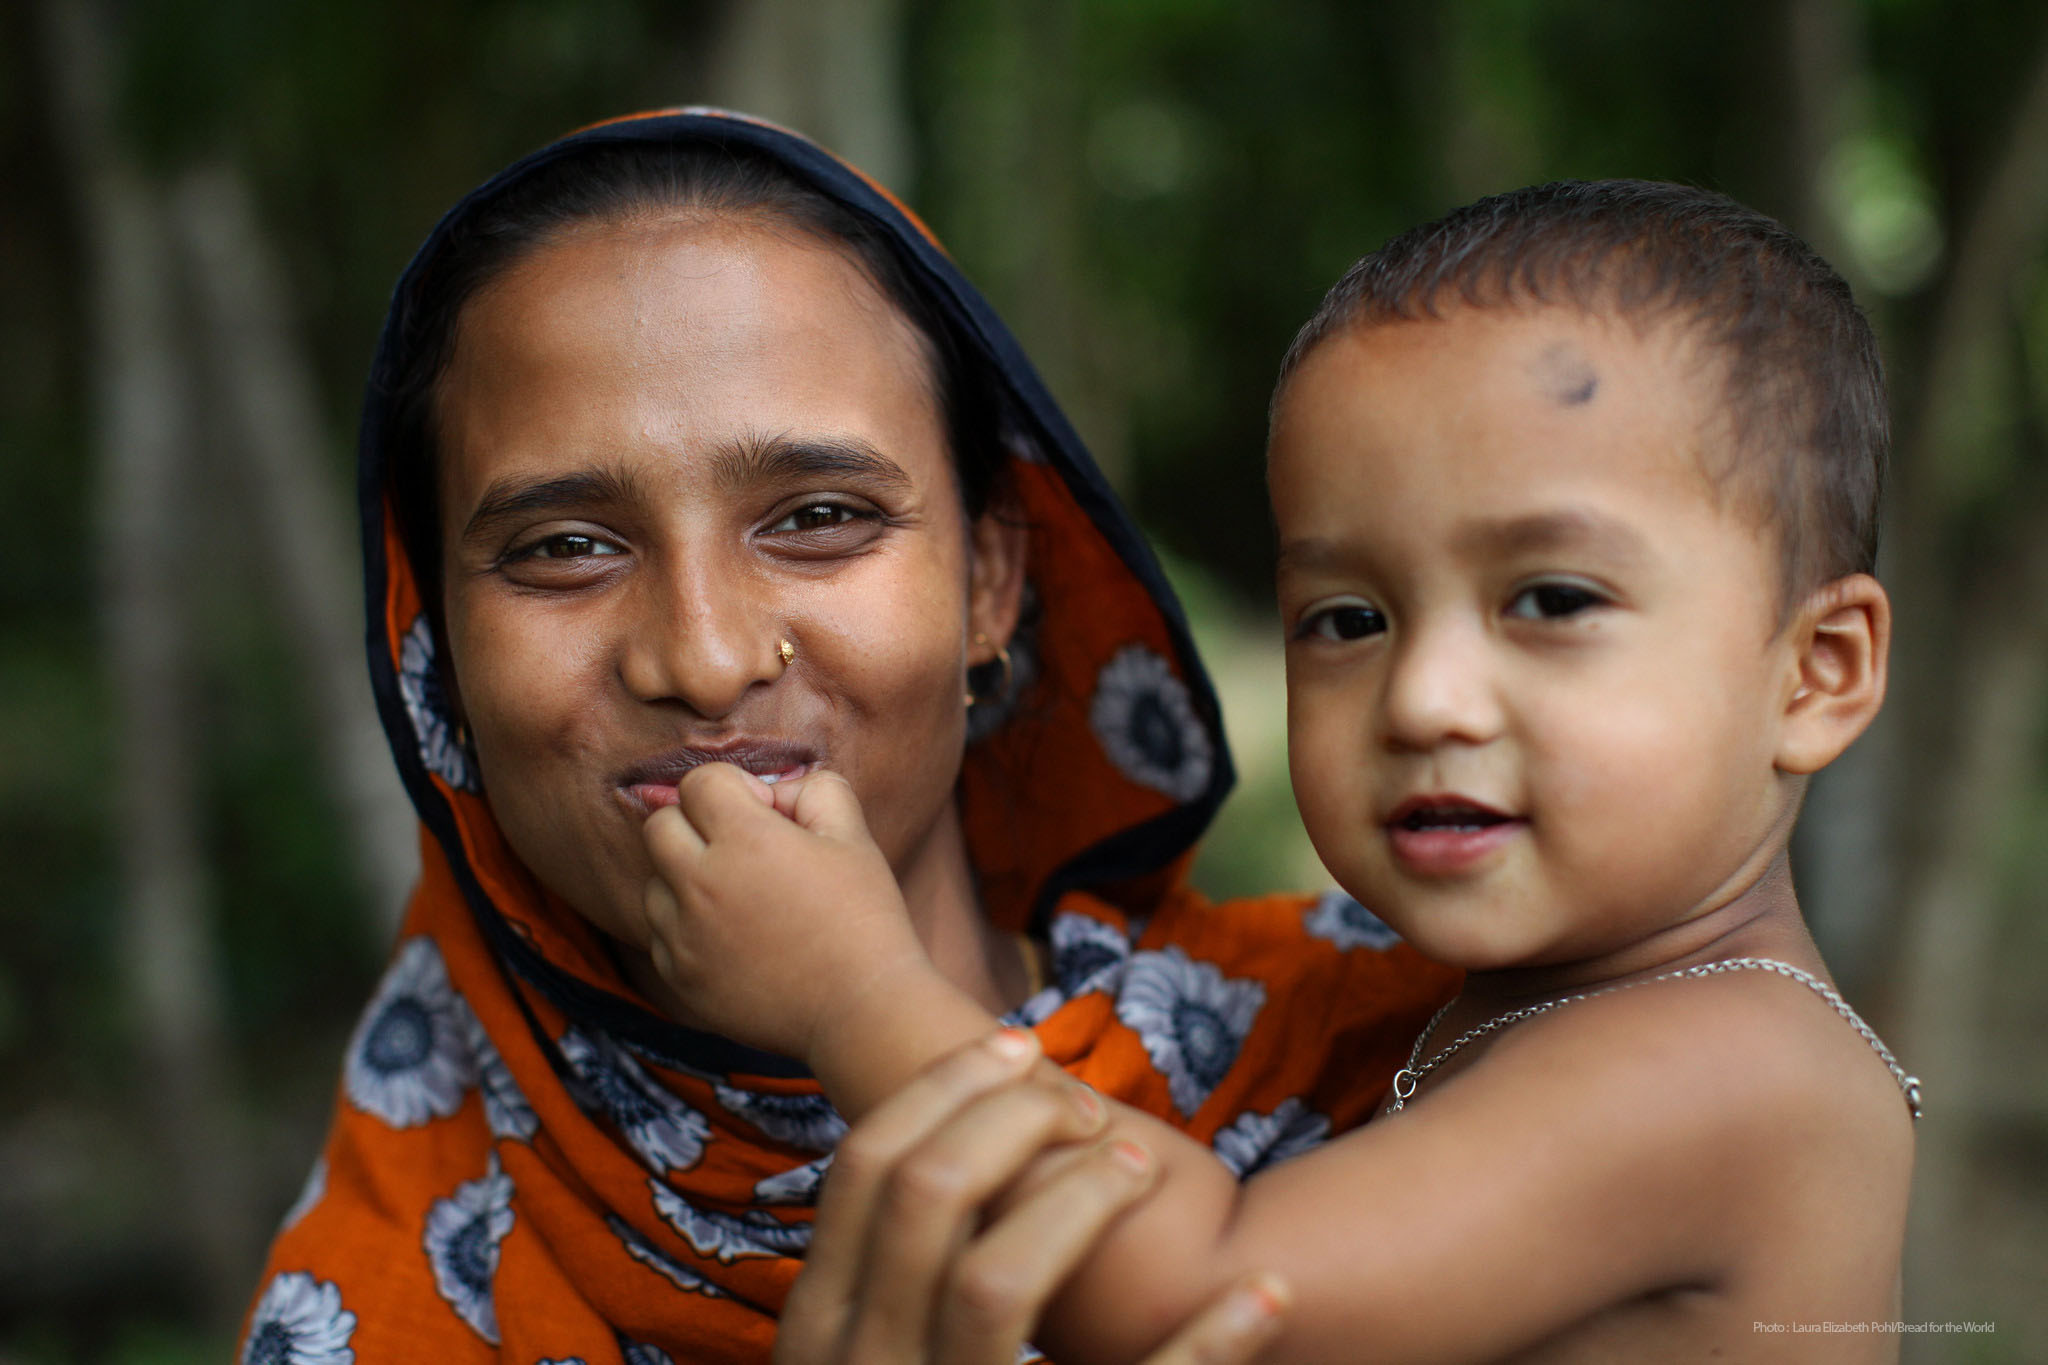 Mother and child - Char Baria village, Barisal, Bangladesh - Photo by Laura Elizabeth Pohl/Bread for the World